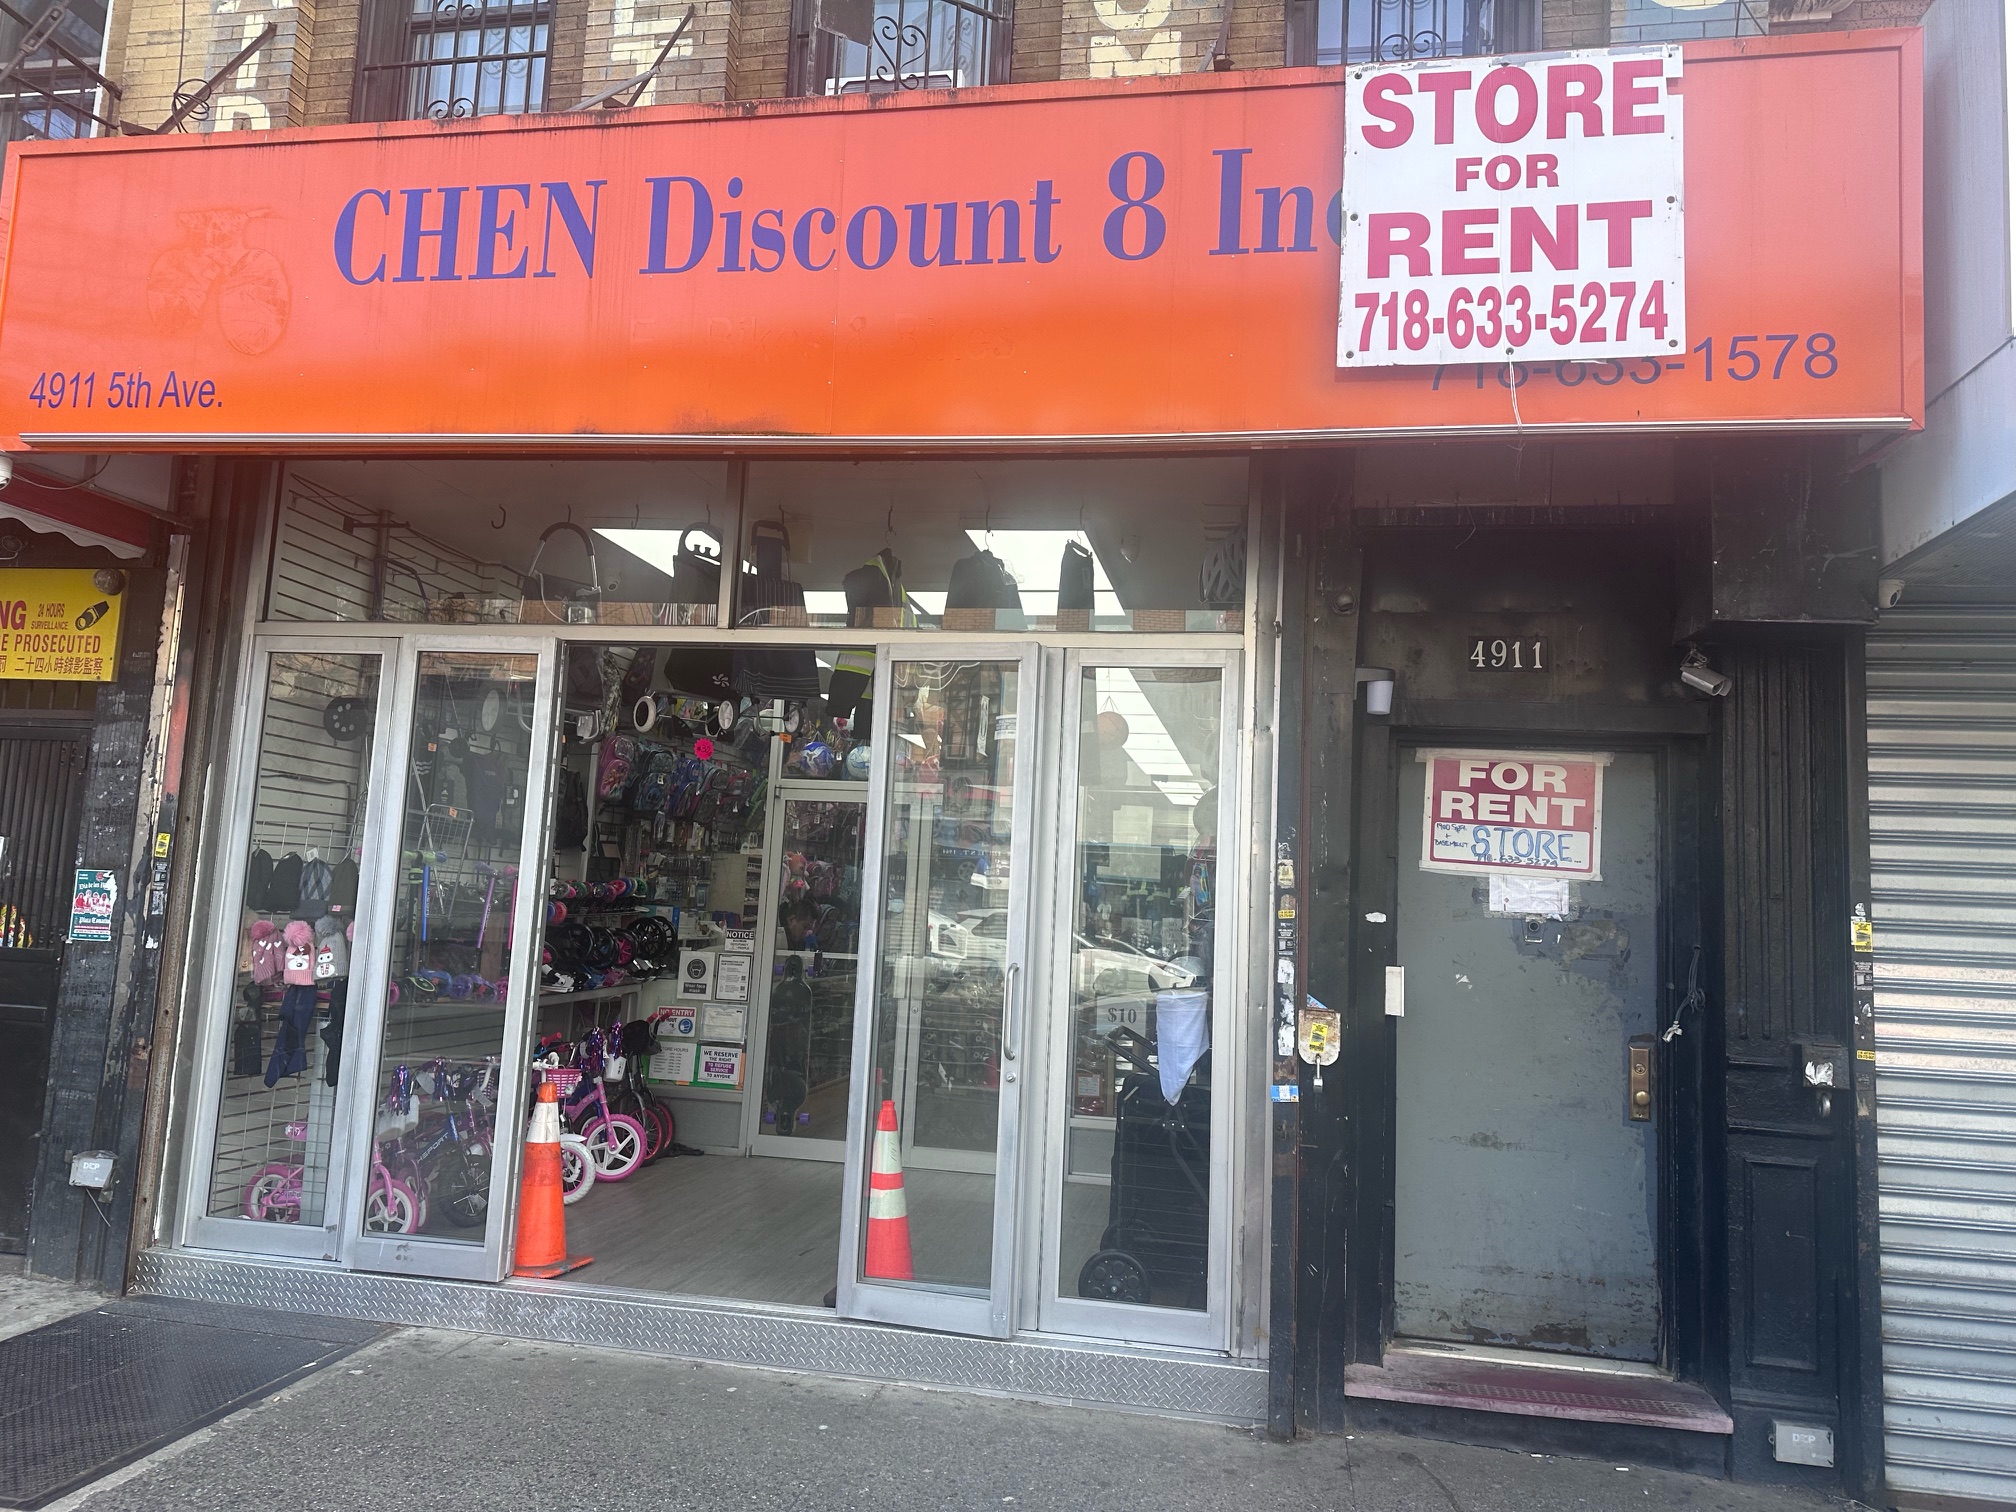 Storefront of "chen discount 8 inc." with a "for rent" sign displayed above the entrance. the shop's windows showcase various items including toys and household goods.